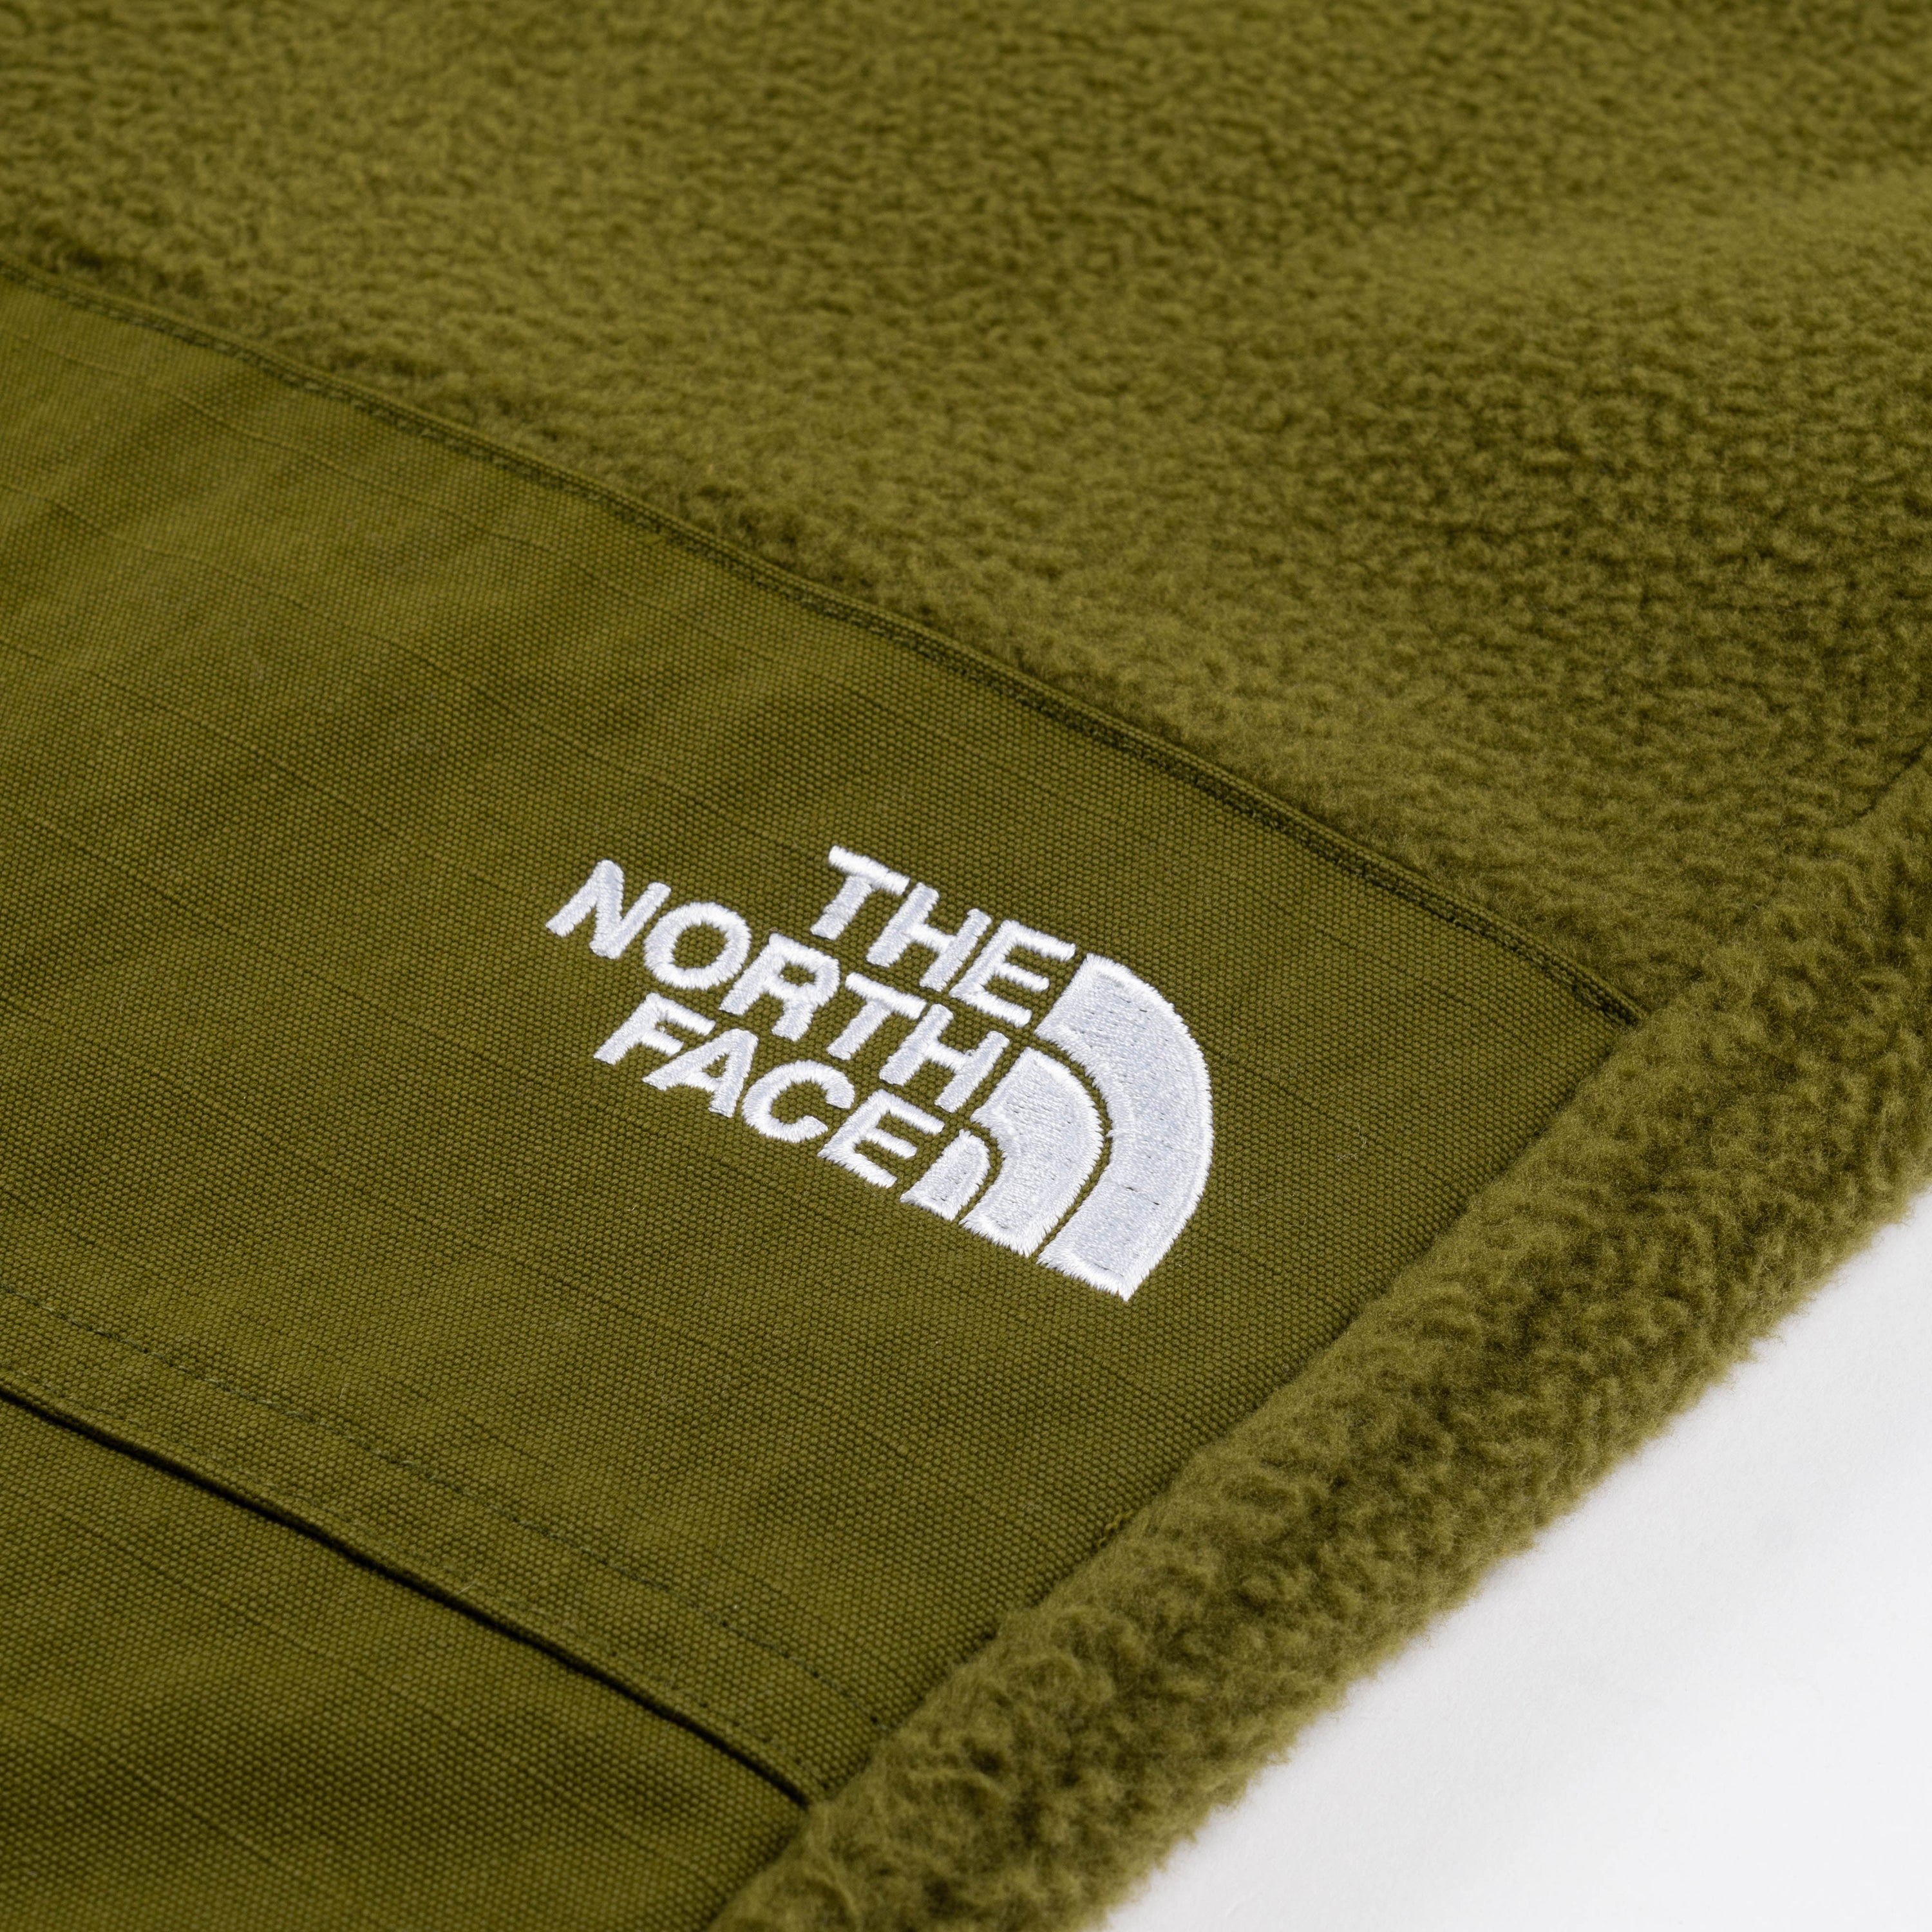 TNF Ripstop Denali Pant Forest Olive NF0A86ZV